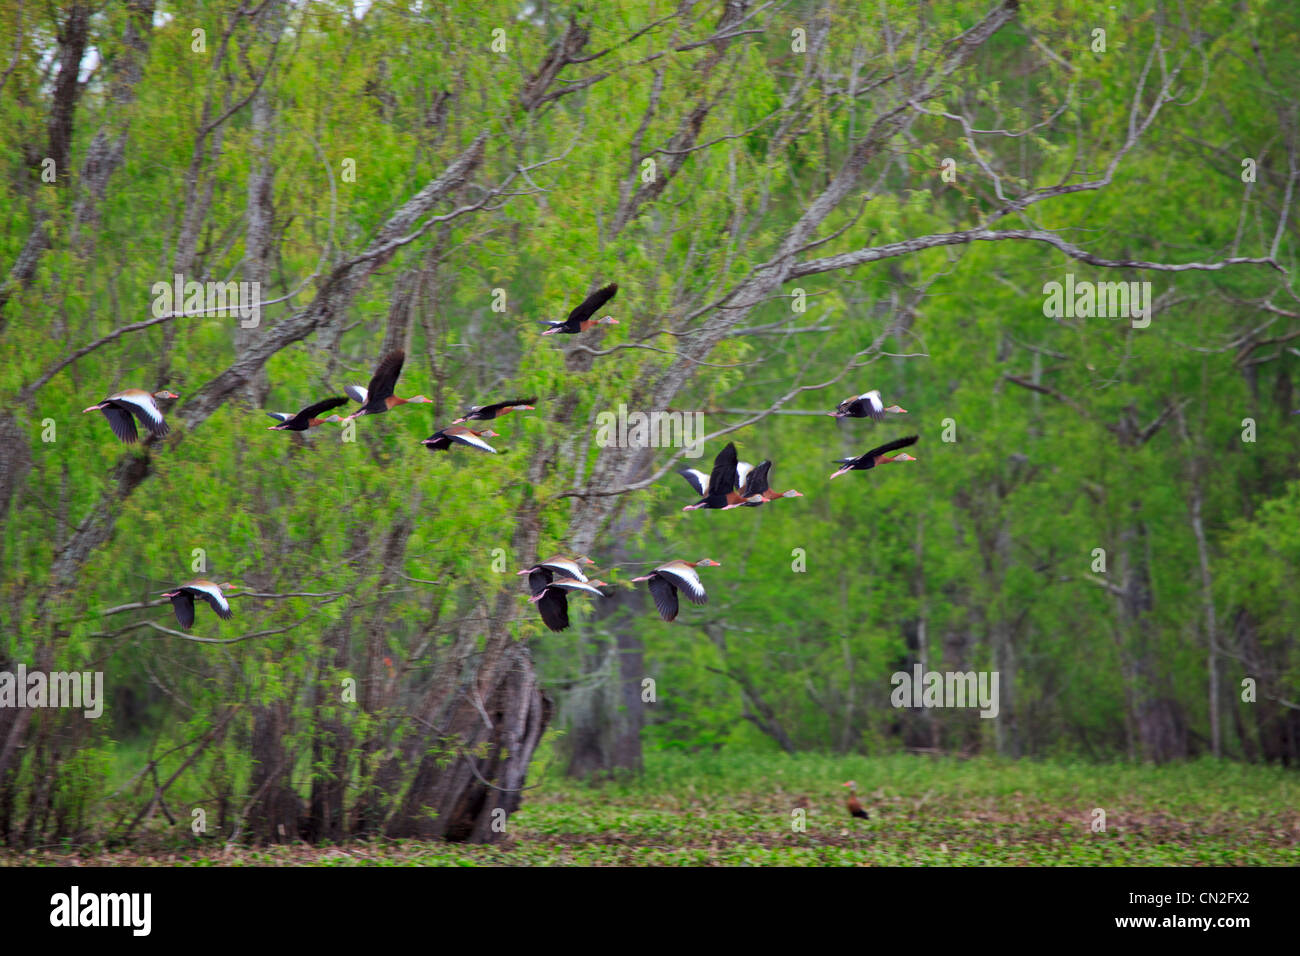 Black-bellied Whistling Duck, Dendrocygna autumnalis. A flock of whistling ducks or tree ducks in the Atchafalaya Swamp. Stock Photo